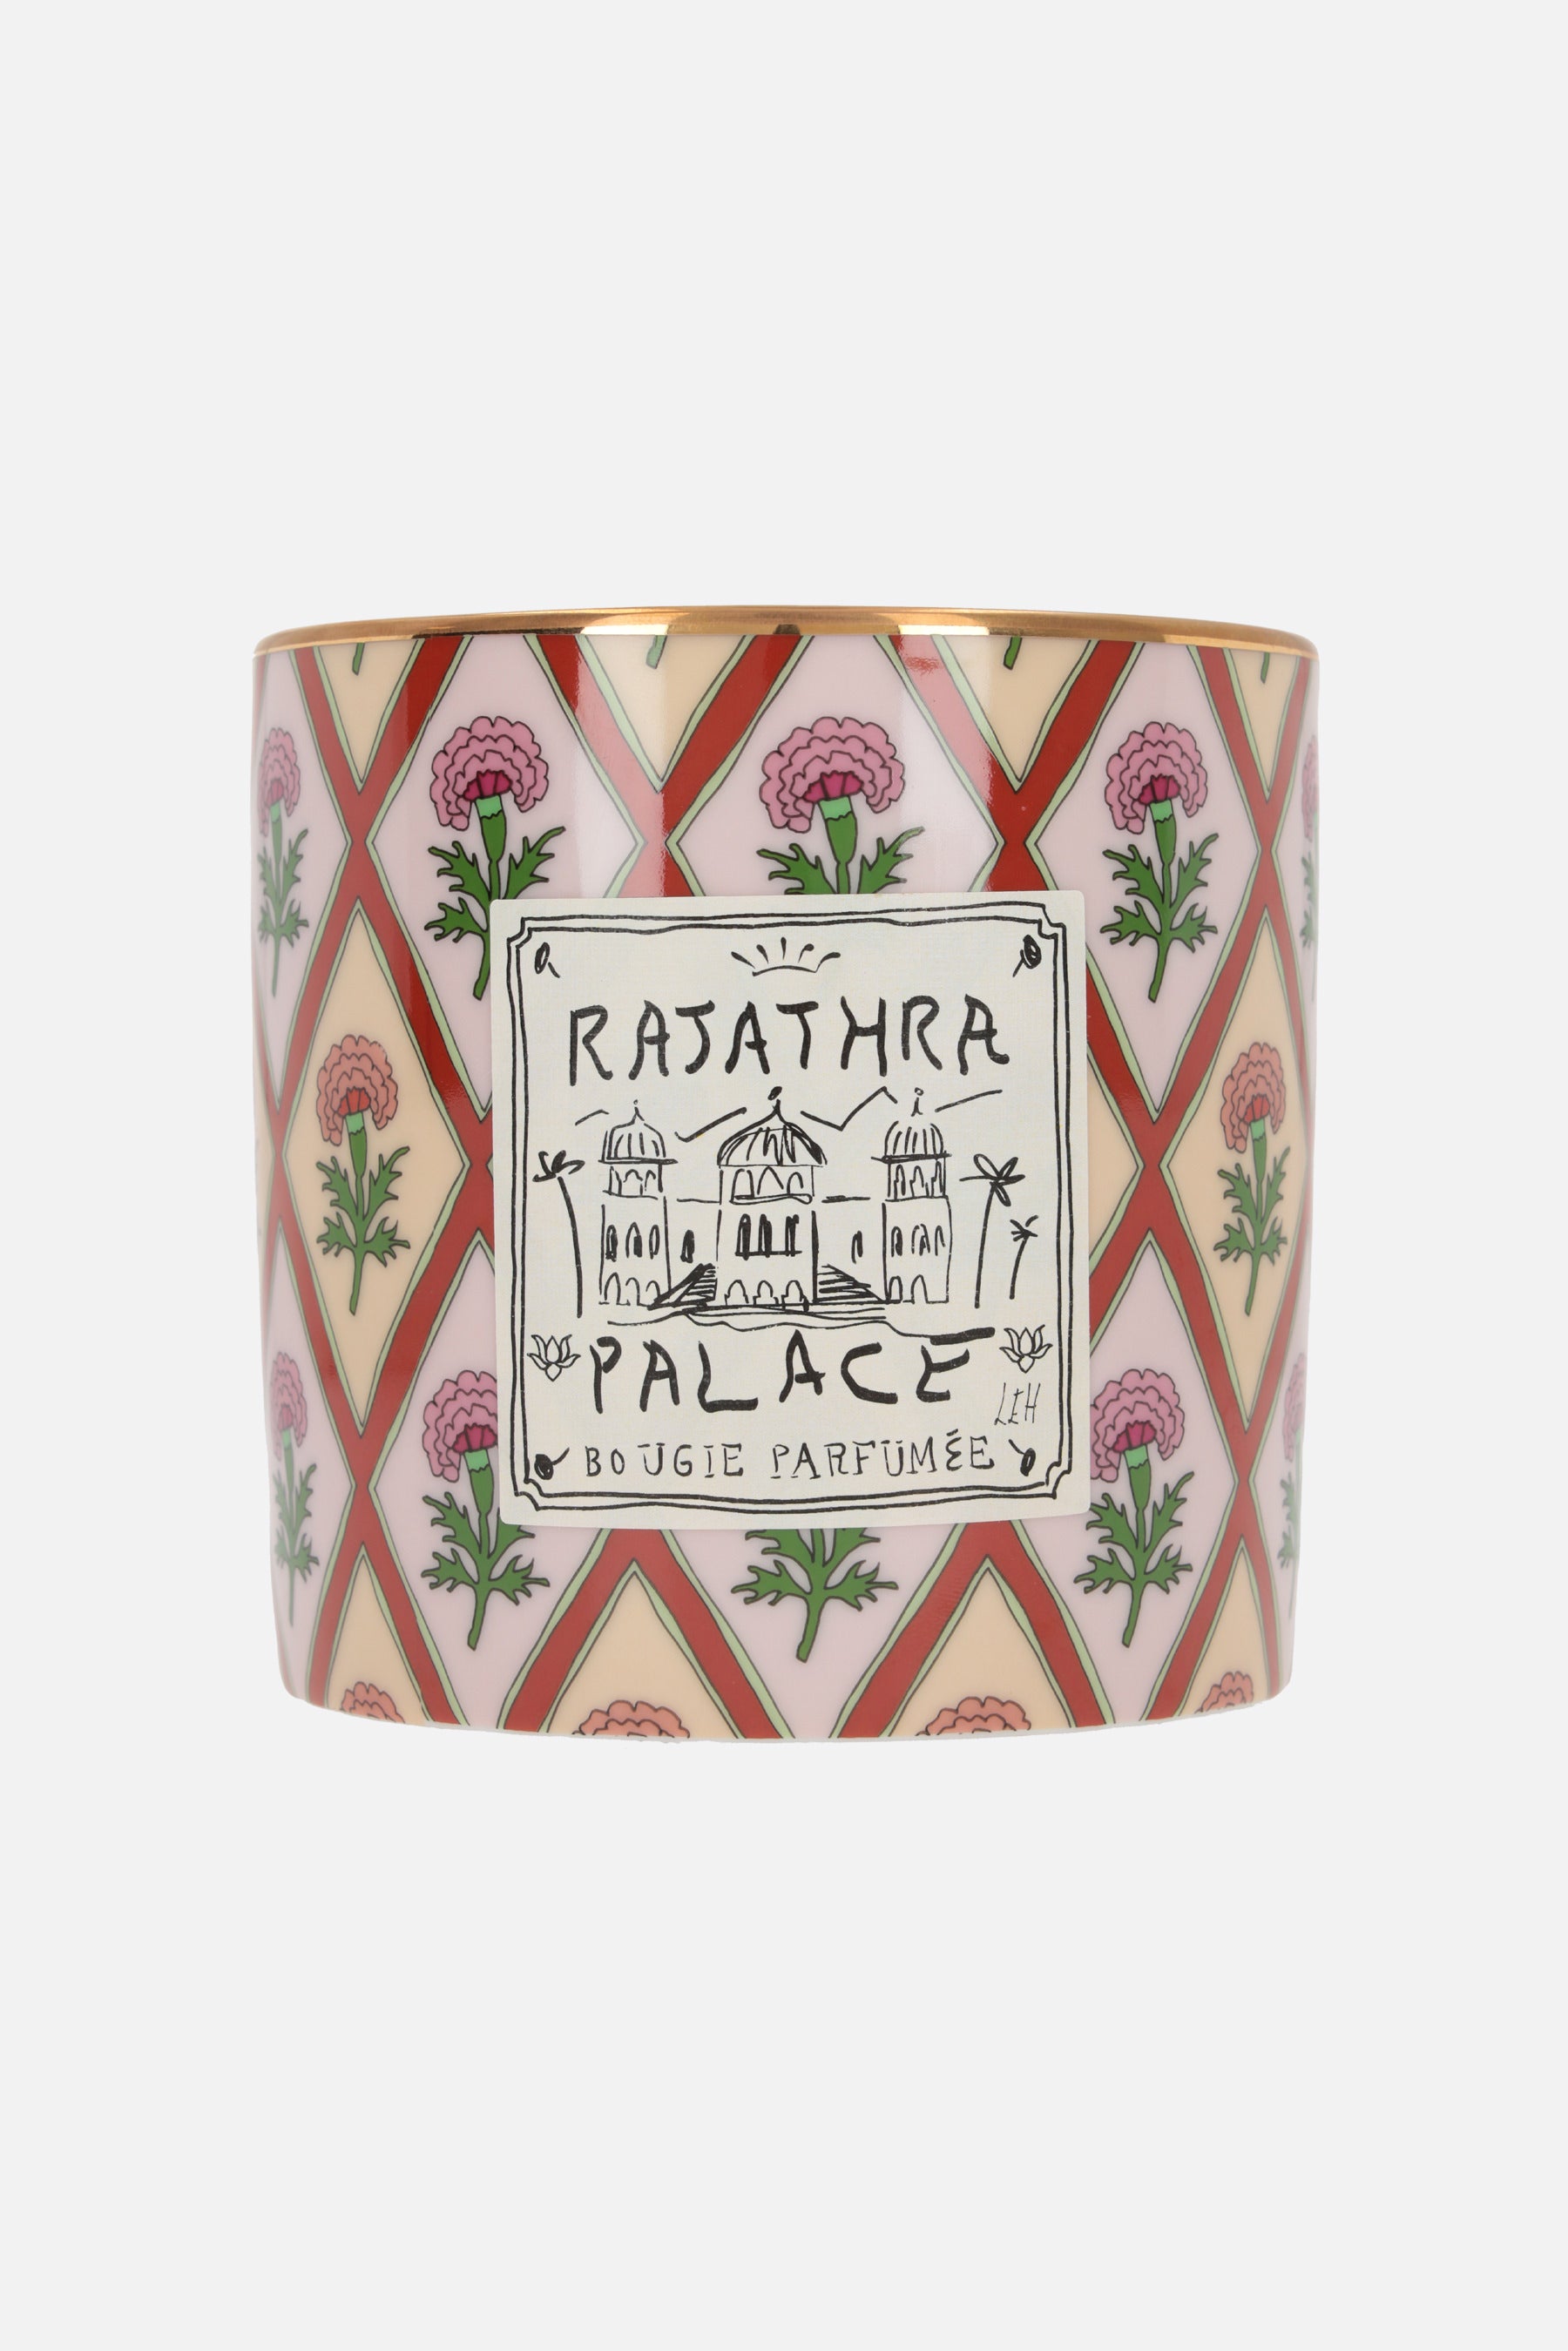 Rajathra Palace large scented candle